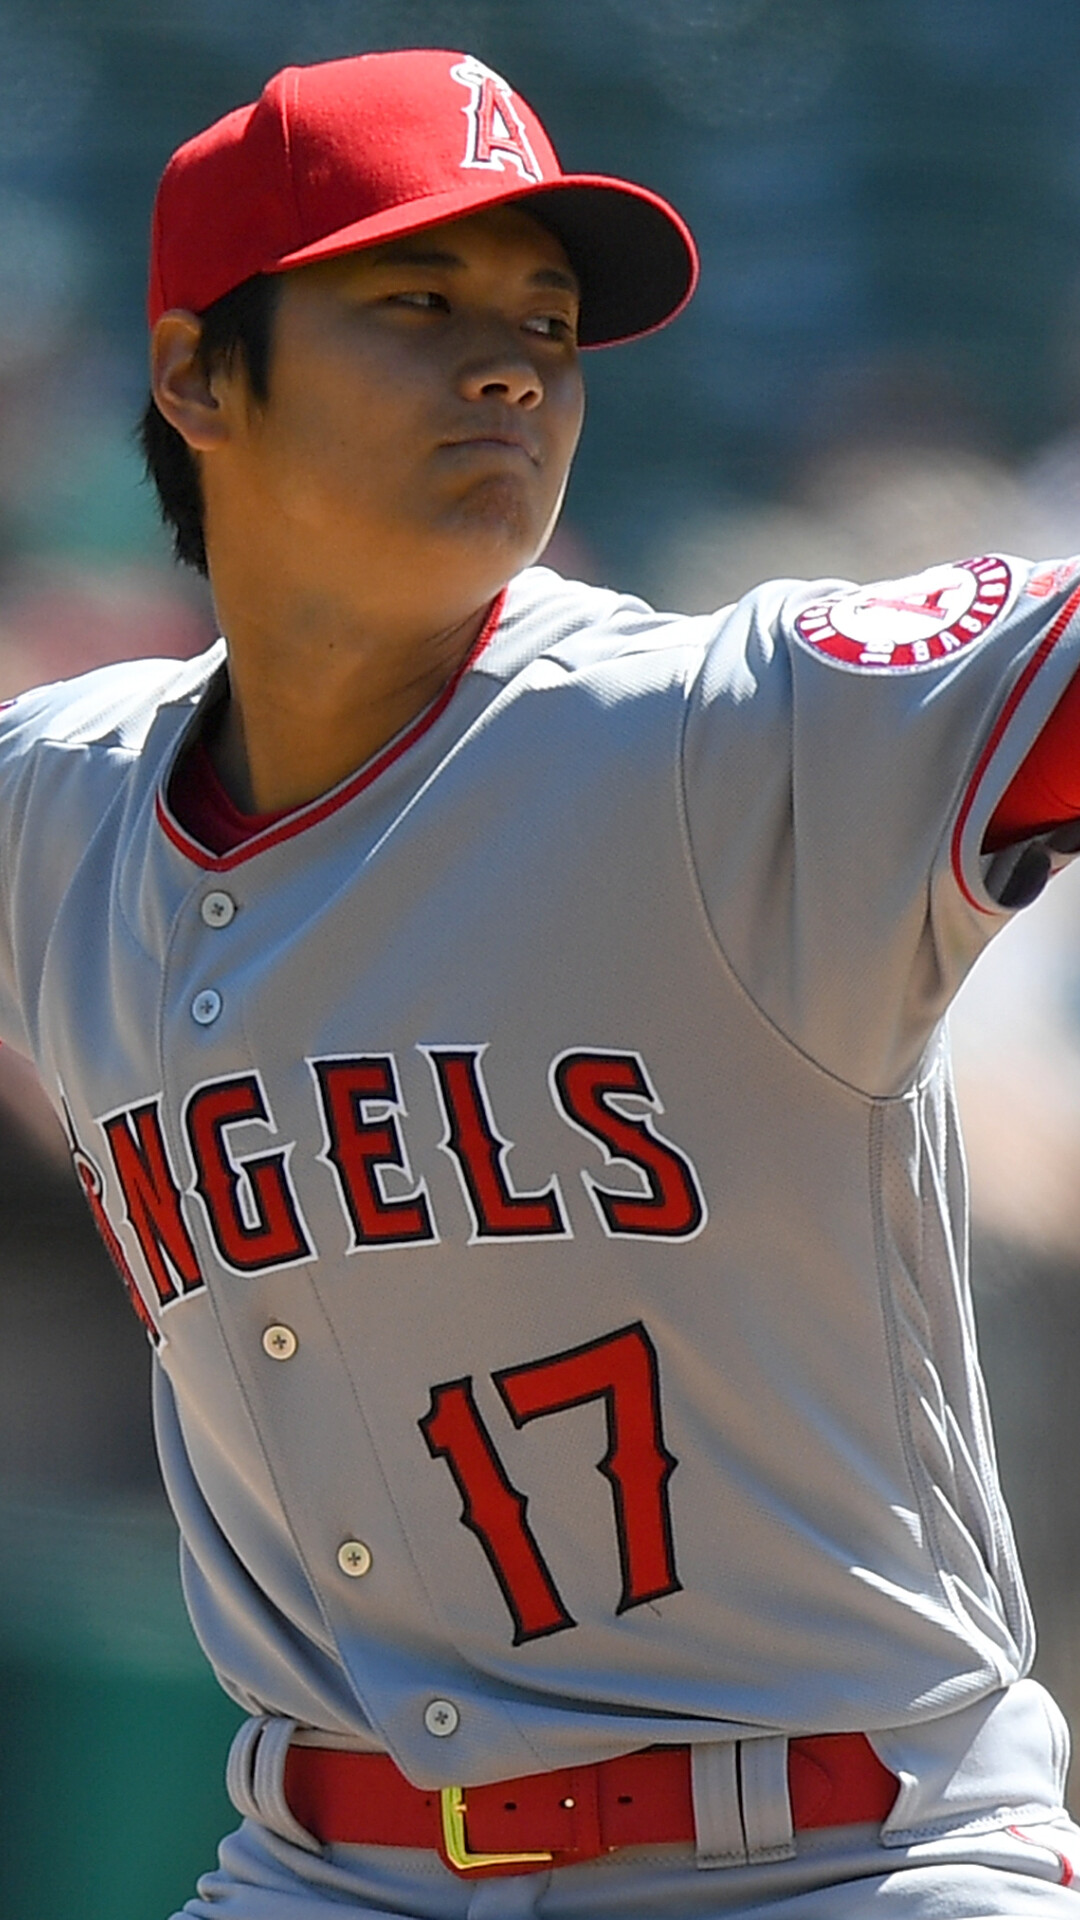 Shohei Ohtani: The first player in AL history to reach 30 home runs and 10 stolen bases in the first 81 games of the season. 1080x1920 Full HD Wallpaper.